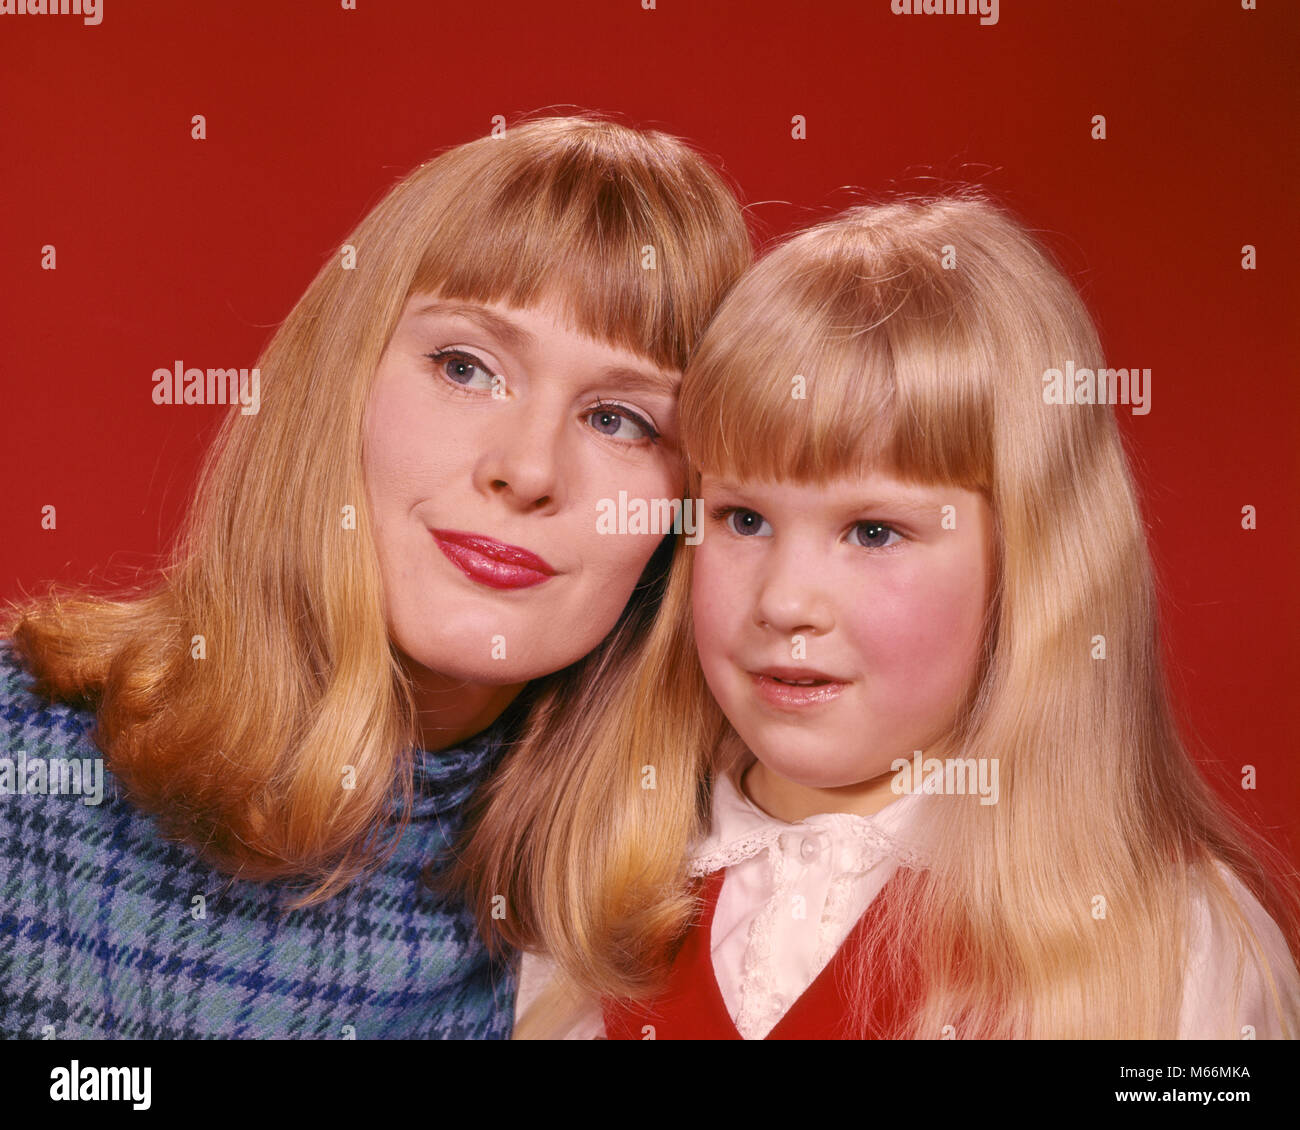 1960s PORTRAIT BLOND MOTHER AND DAUGHTER - kj3822 HAR001 HARS CAUCASIAN LIFESTYLE PARENTING FEMALES STUDIO SHOT GROWNUP HOME LIFE COPY SPACE PEOPLE CHILDREN FRIENDSHIP LADIES DAUGHTERS GROWN-UP INDOORS FAMILIES NOSTALGIA TOGETHERNESS 20-25 YEARS 25-30 YEARS 3-4 YEARS 5-6 YEARS MATERNAL YOUNGSTER WELLNESS HEAD AND SHOULDERS MOMS PARENTHOOD PARENTAL GROWTH R CONNECTION MOTHERHOOD CLOSE-UP LONG HAIR FAMILY RESEMBLANCE JUVENILES MID-ADULT MID-ADULT WOMAN BANGS CAUCASIAN ETHNICITY HEAD TO HEAD OLD FASHIONED PERSONS Stock Photo